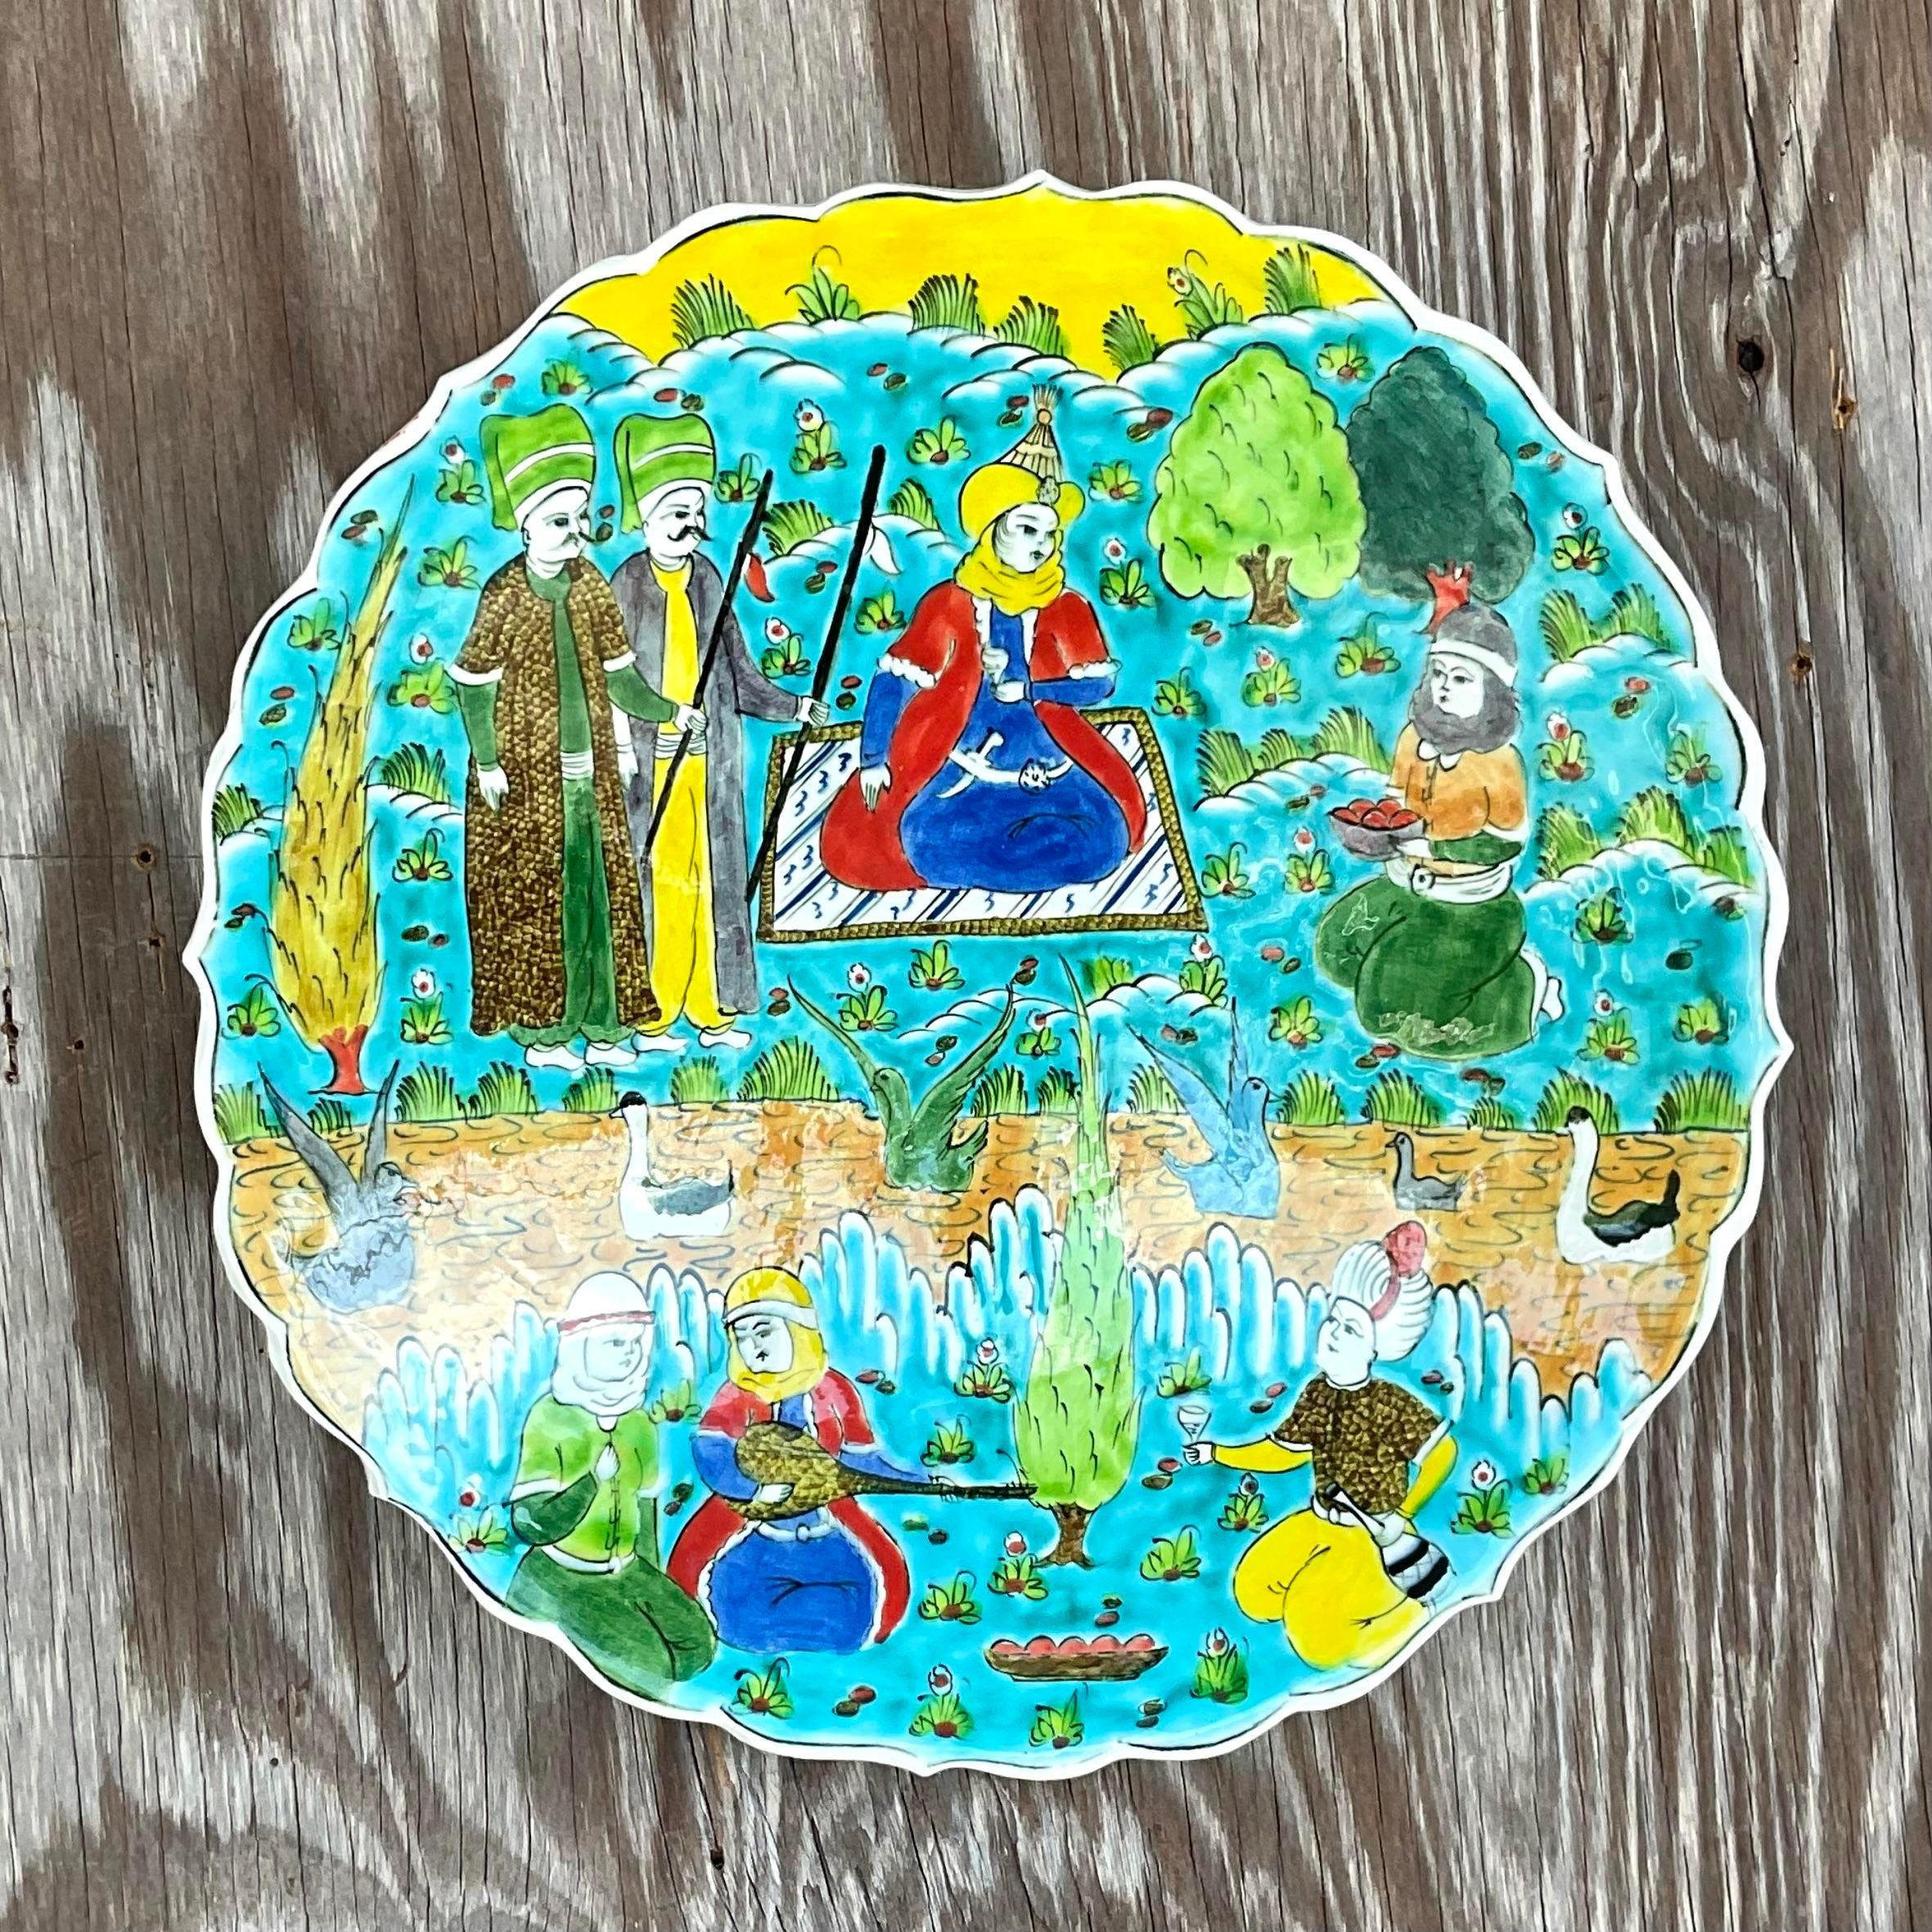 Vintage Boho Glazed Ceramic Decorative Plate In Good Condition For Sale In west palm beach, FL